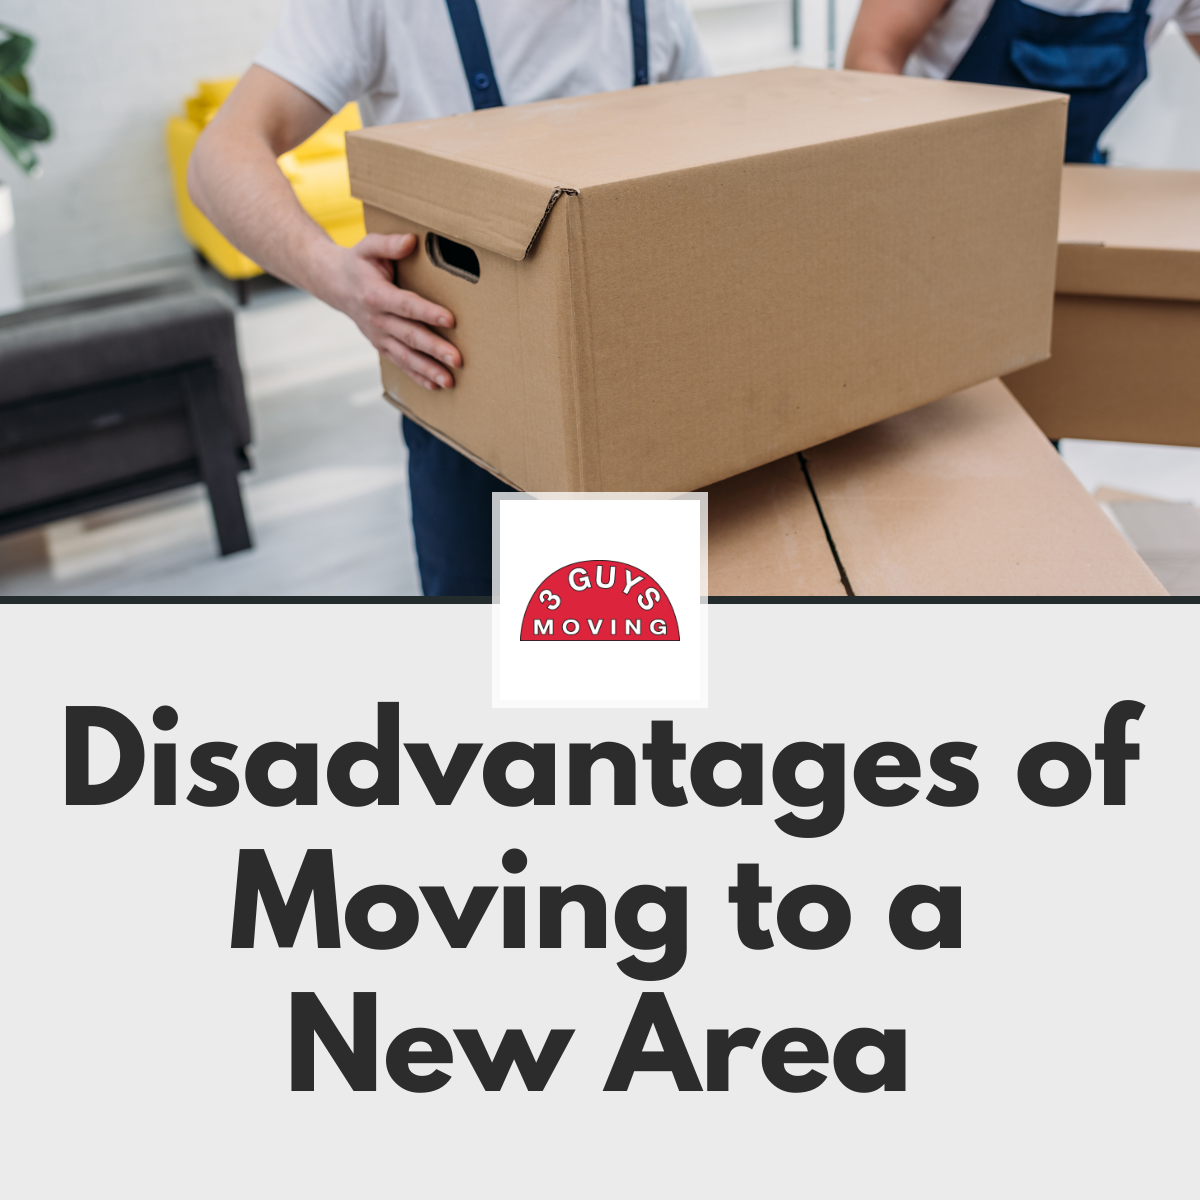 Disadvantages of Moving to a New Area - Disadvantages of Moving to a New Area